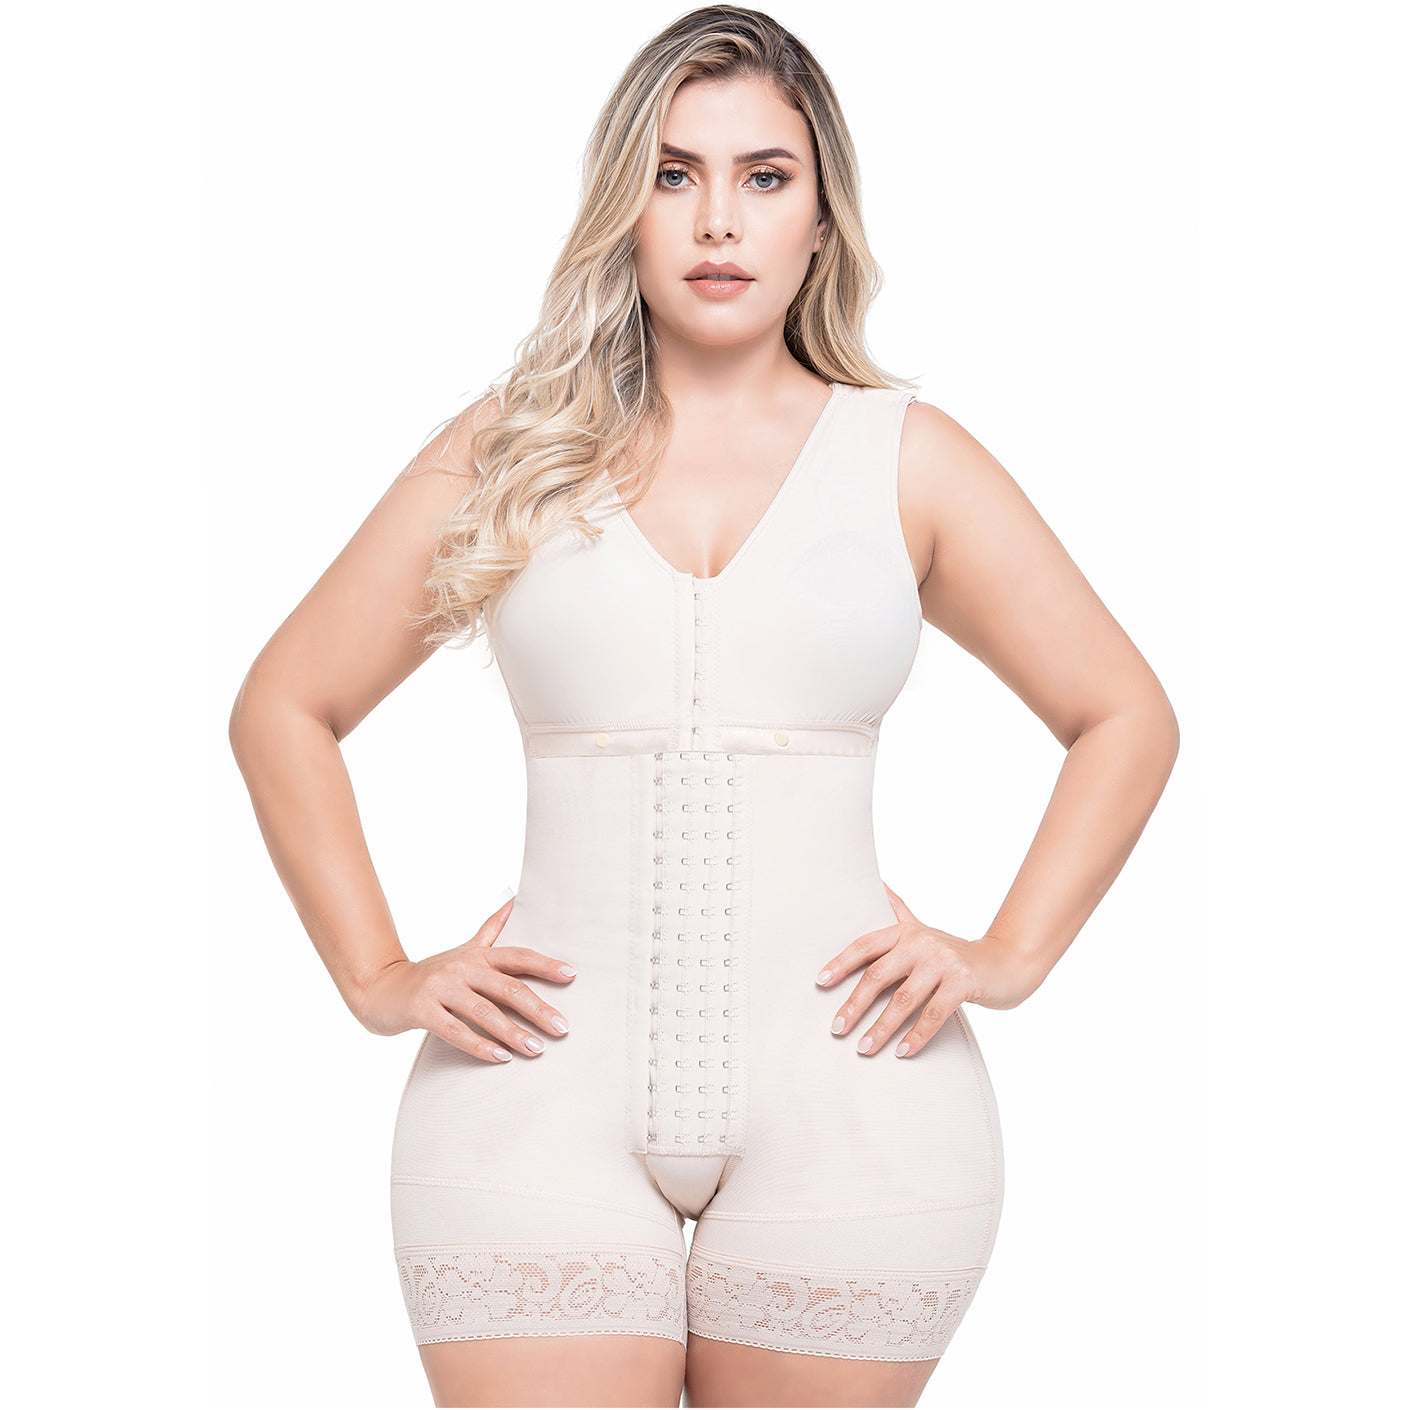 Colombian Girdles Complete collection sale